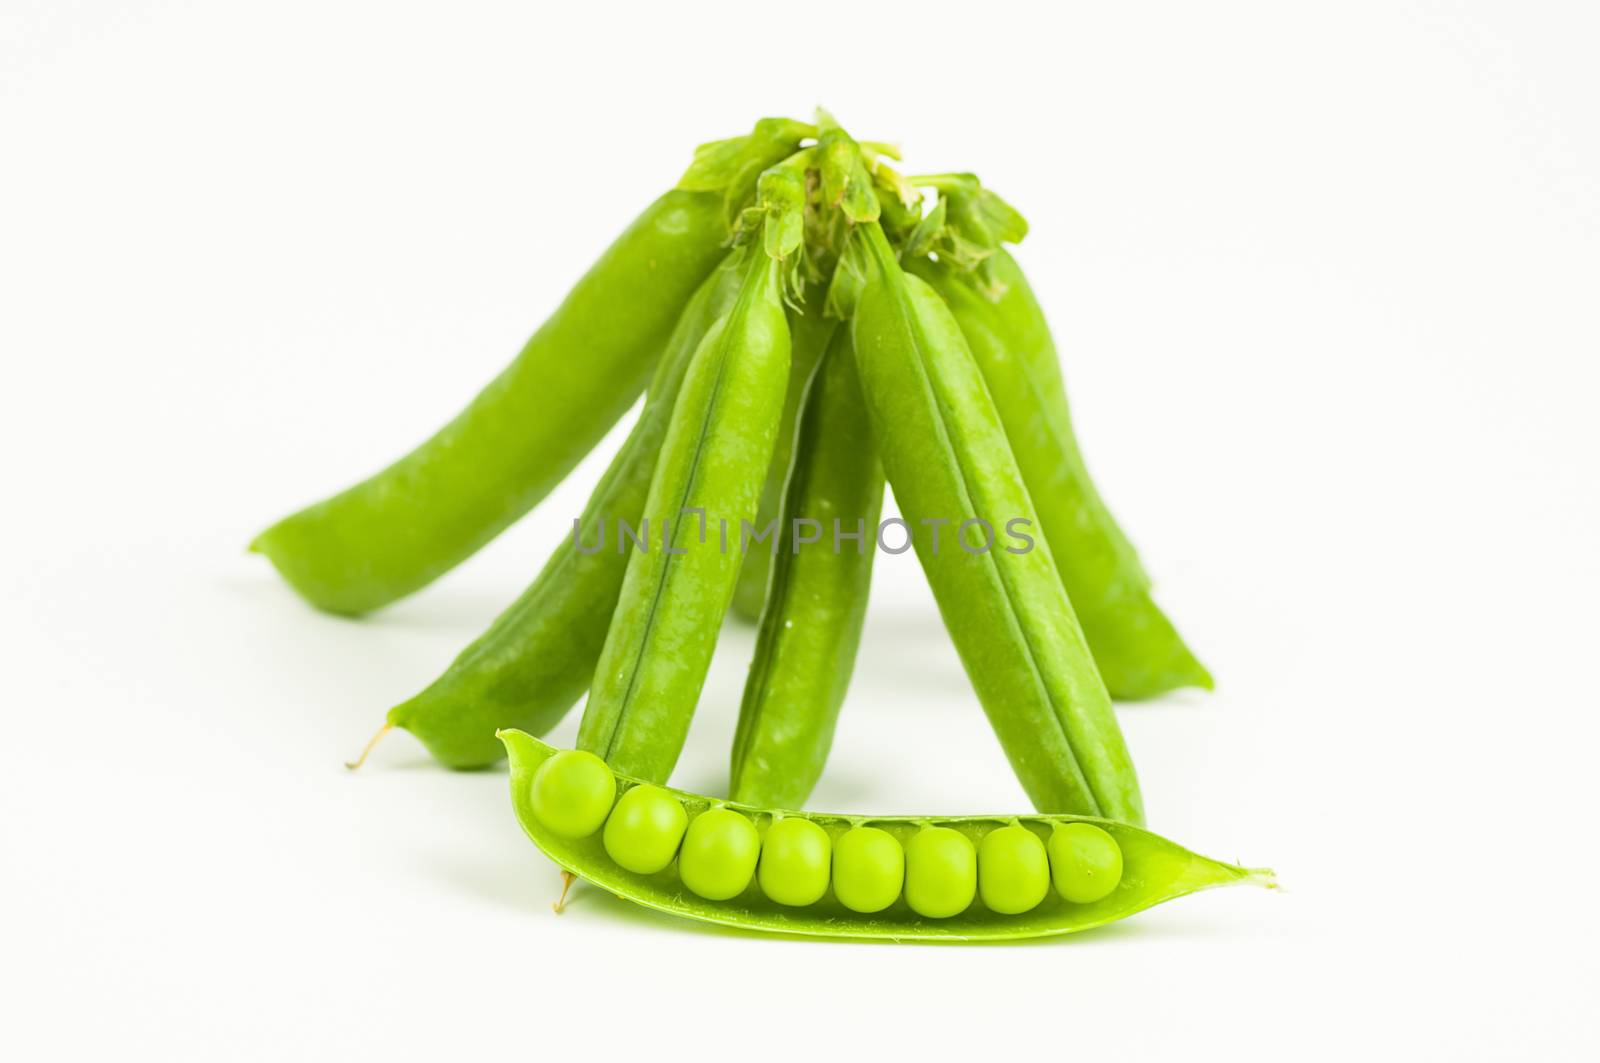 Organic peas in the pod by dred